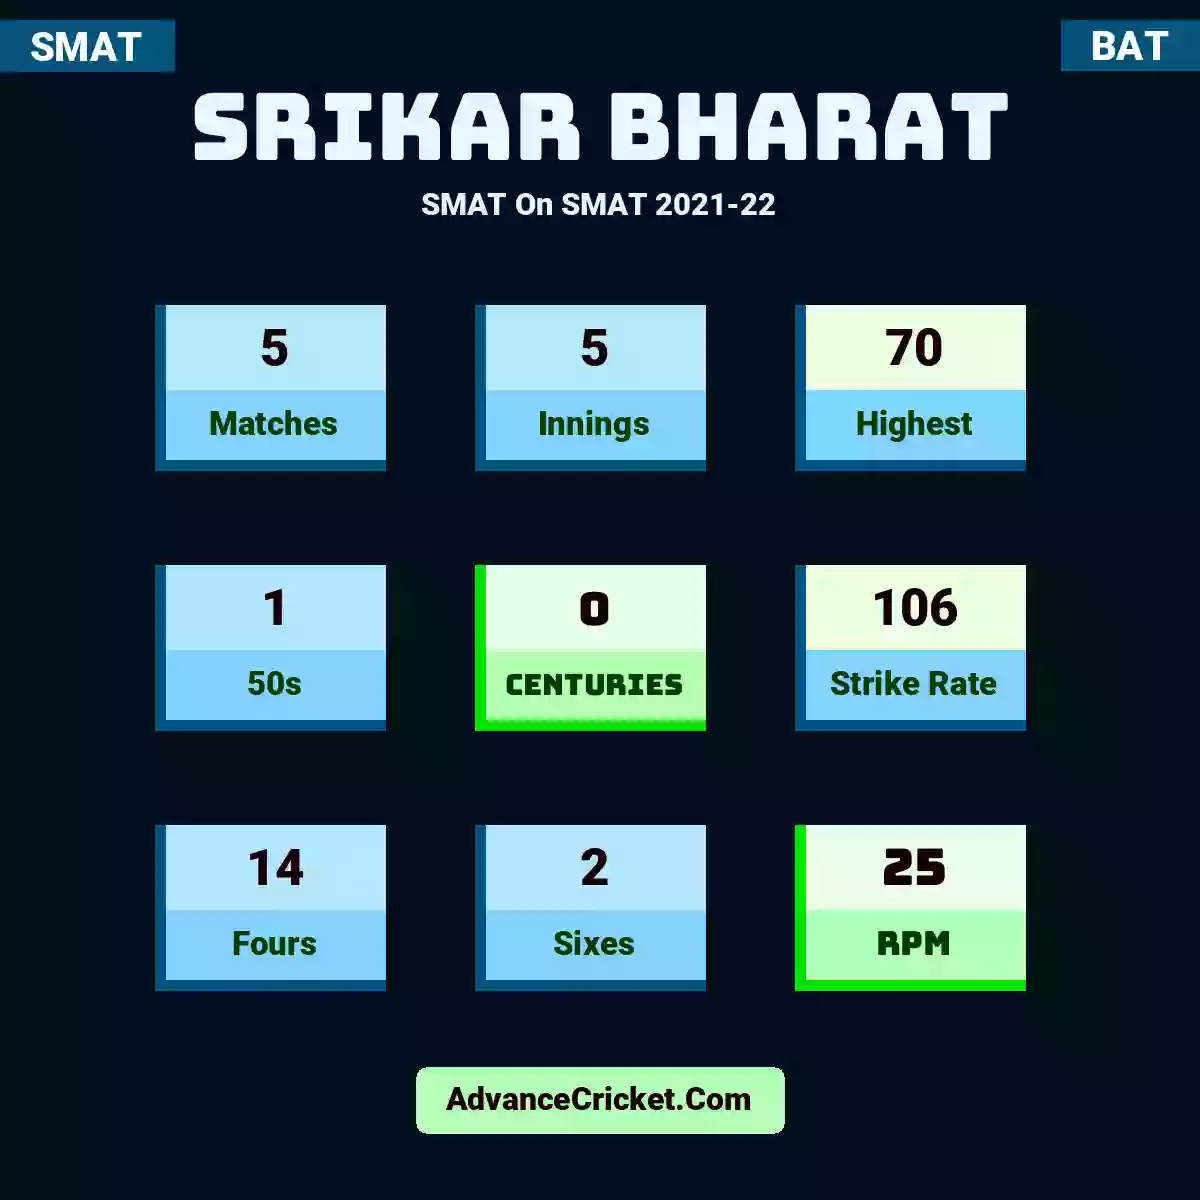 Srikar Bharat SMAT  On SMAT 2021-22, Srikar Bharat played 5 matches, scored 70 runs as highest, 1 half-centuries, and 0 centuries, with a strike rate of 106. S.Bharat hit 14 fours and 2 sixes, with an RPM of 25.